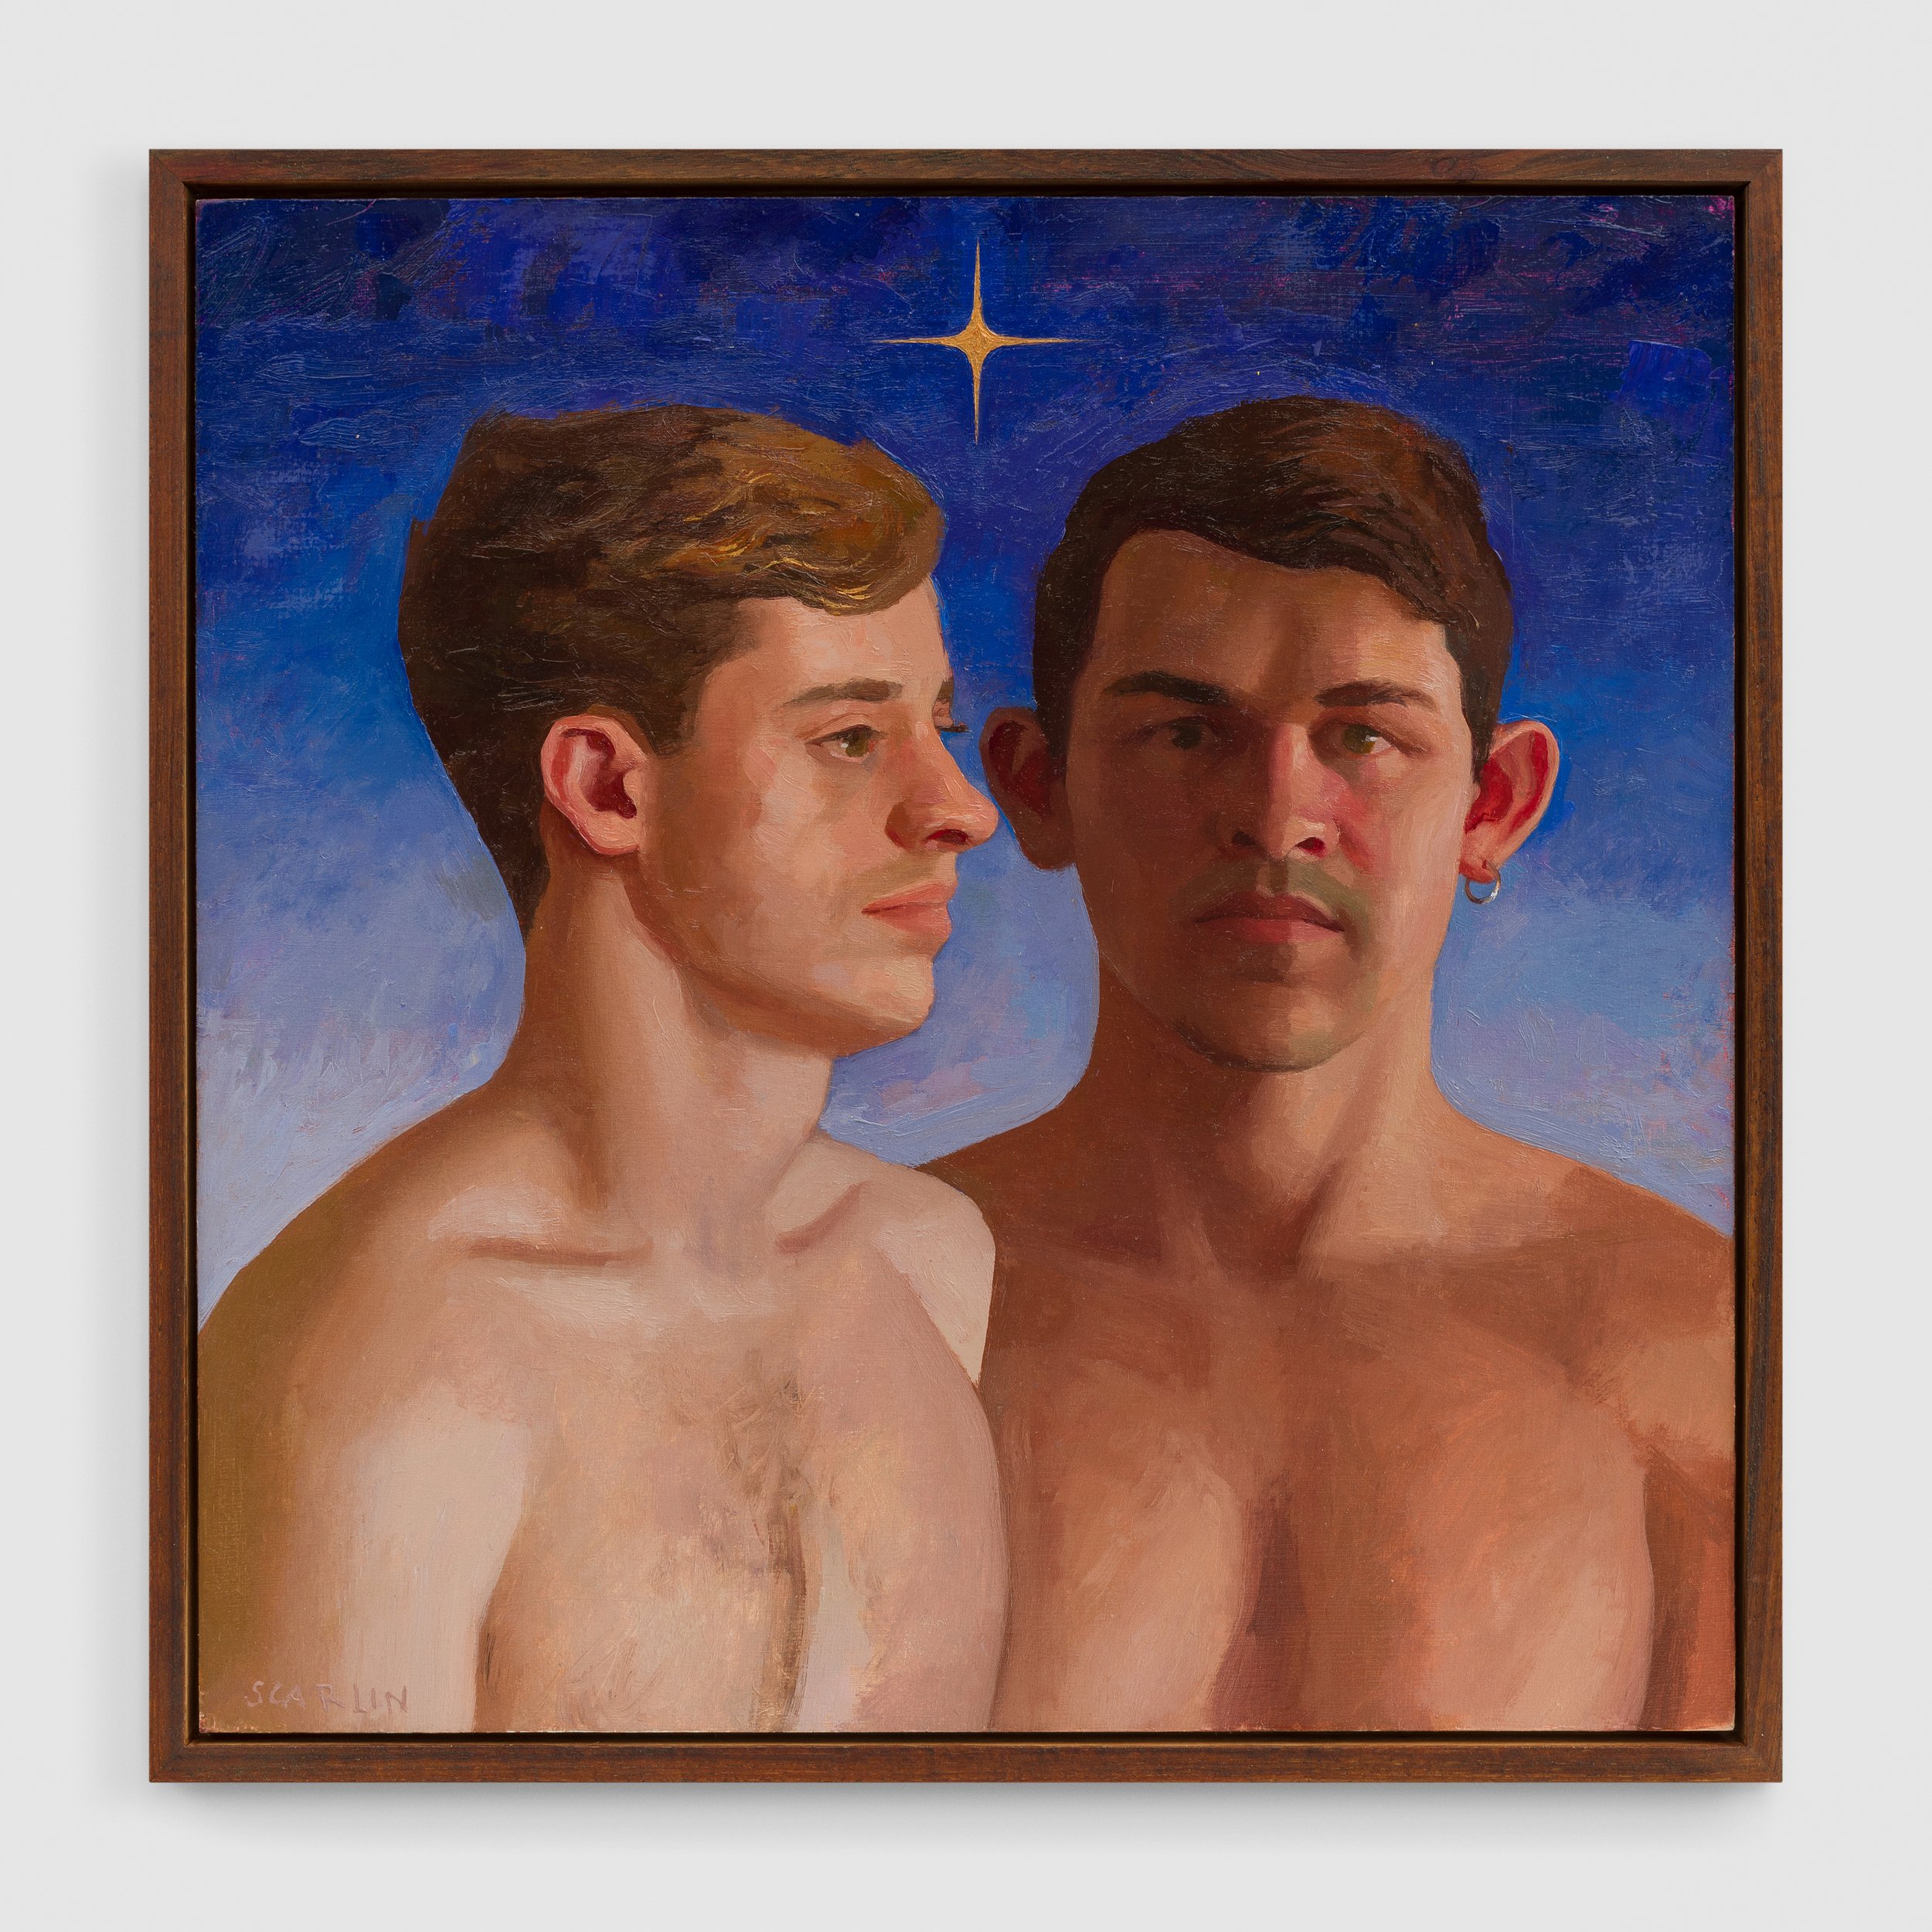  Two boys and evening star  Oil on panel 35 x 35cm  2022  private collection 